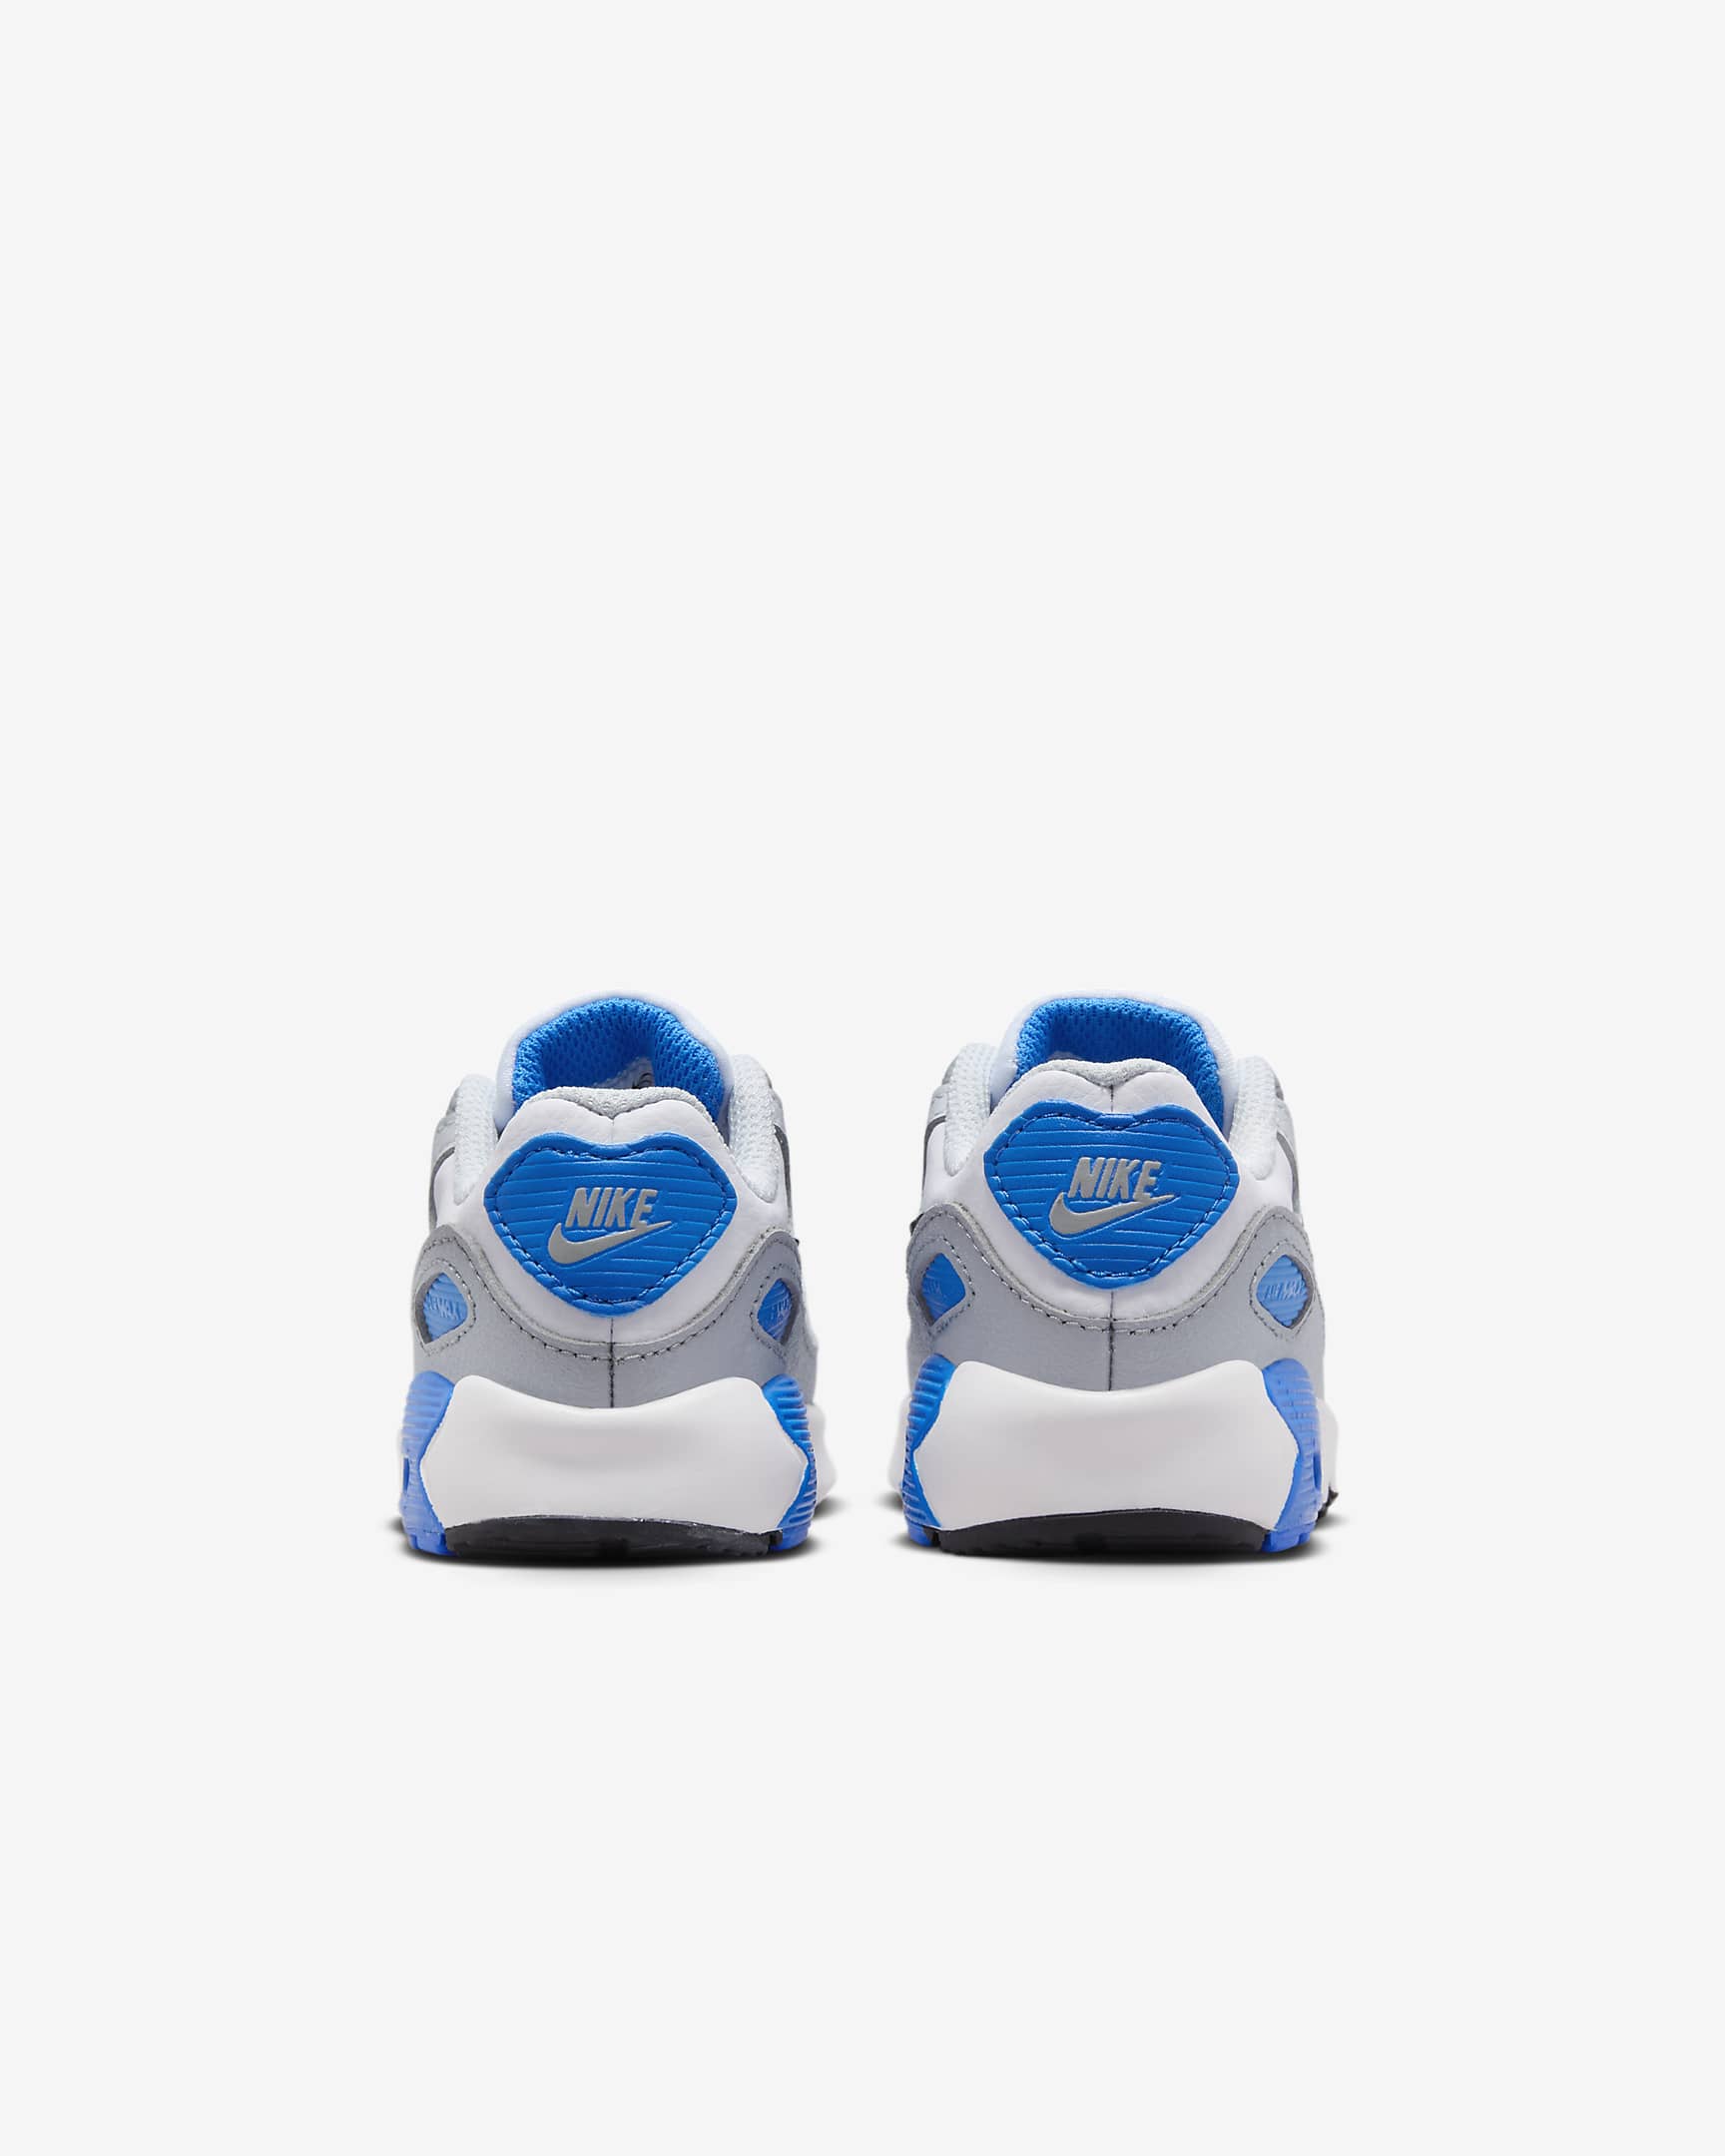 Nike Air Max 90 LTR Baby/Toddler Shoes. Nike SK